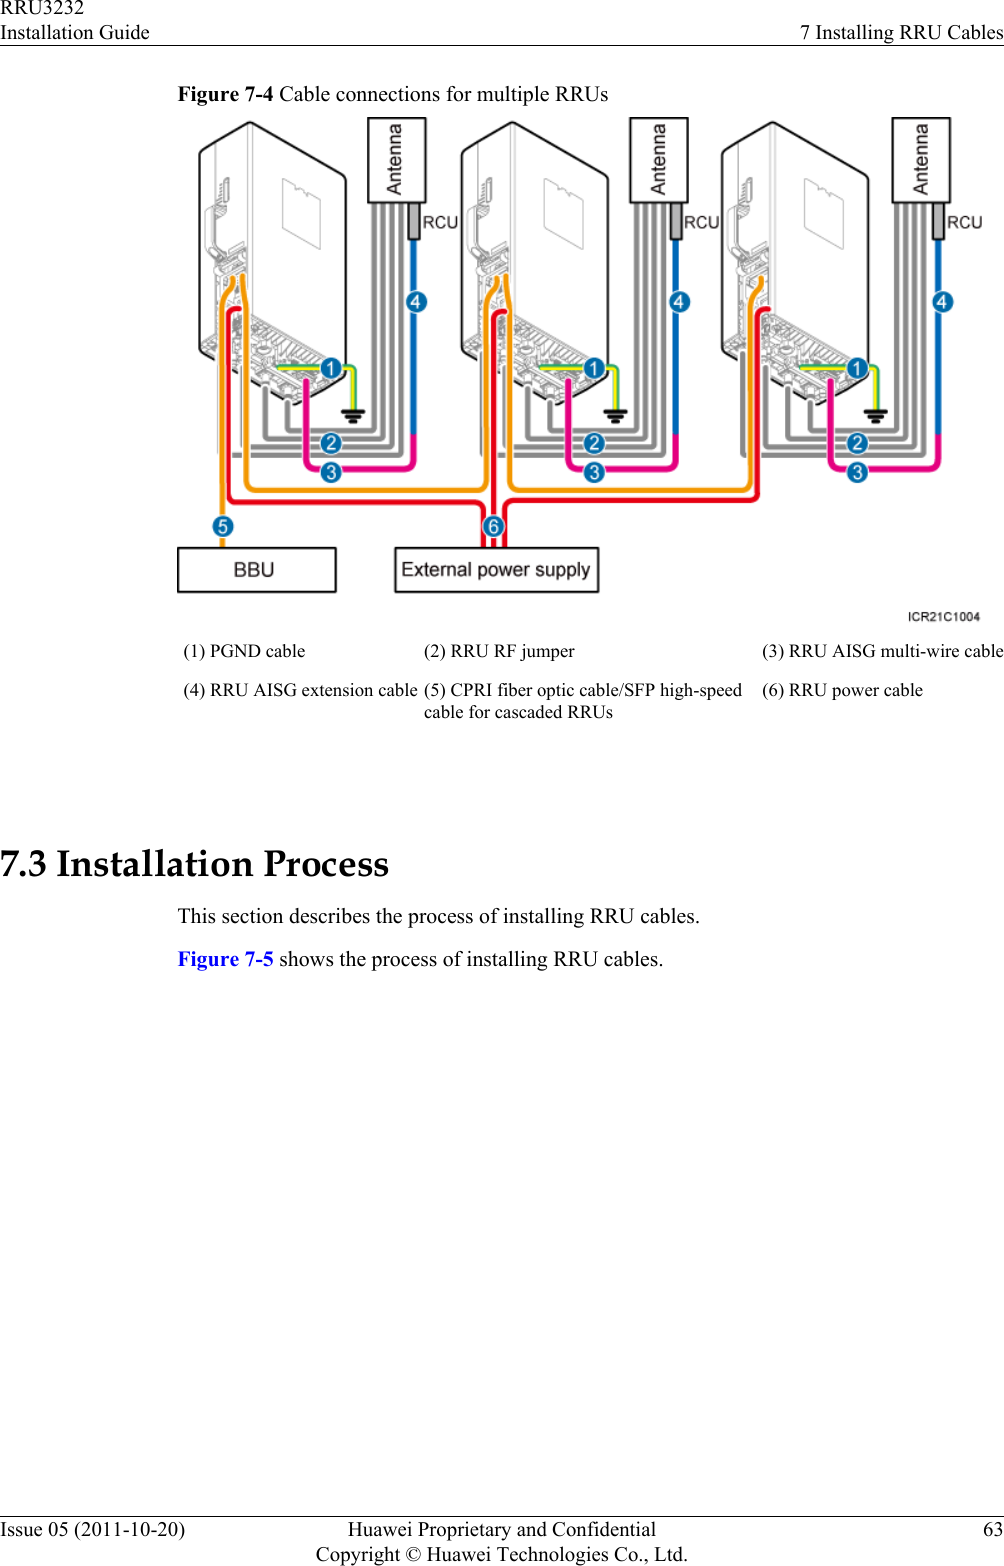 Figure 7-4 Cable connections for multiple RRUs(1) PGND cable (2) RRU RF jumper (3) RRU AISG multi-wire cable(4) RRU AISG extension cable (5) CPRI fiber optic cable/SFP high-speedcable for cascaded RRUs(6) RRU power cable 7.3 Installation ProcessThis section describes the process of installing RRU cables.Figure 7-5 shows the process of installing RRU cables.RRU3232Installation Guide 7 Installing RRU CablesIssue 05 (2011-10-20) Huawei Proprietary and ConfidentialCopyright © Huawei Technologies Co., Ltd.63